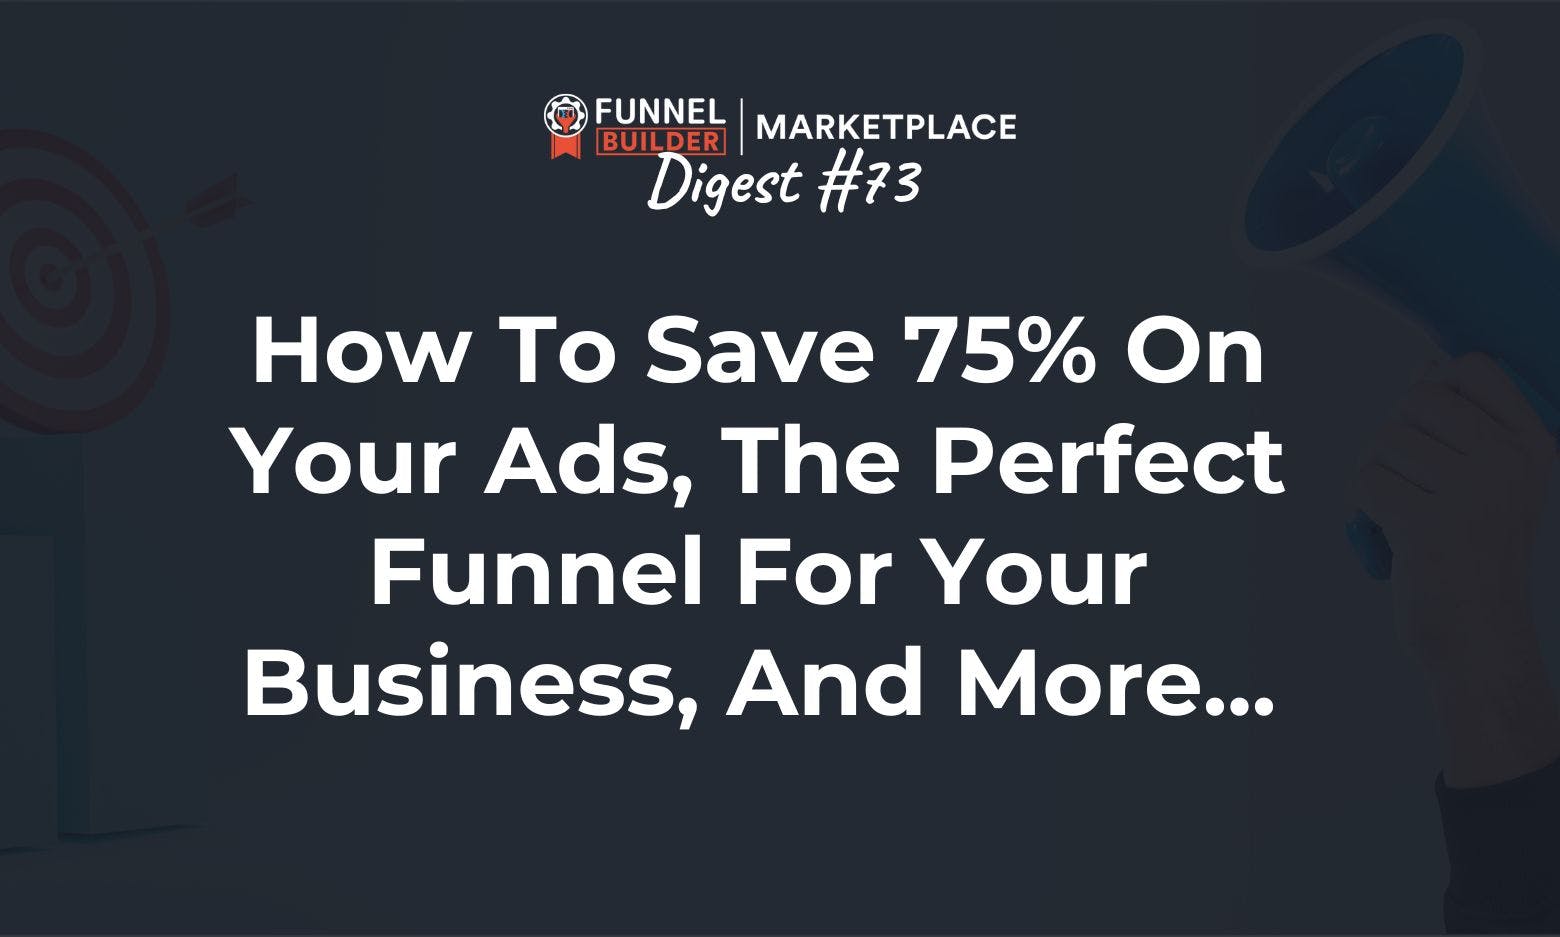 FBM Digest #73: How to save 75% on your ads, the perfect funnel for your business, and more...